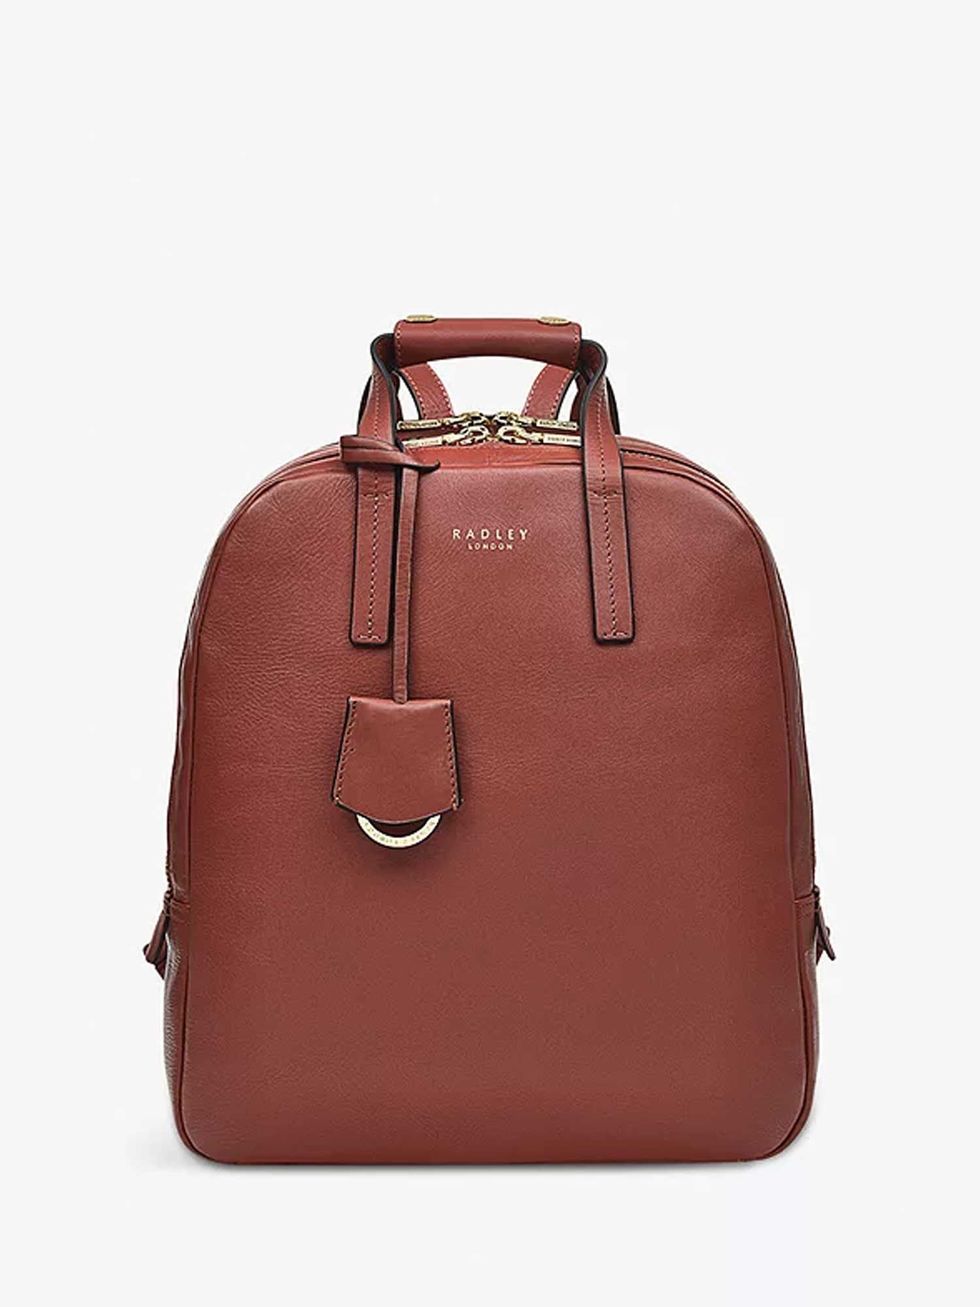 Best women's leather backpacks that are full of practical features